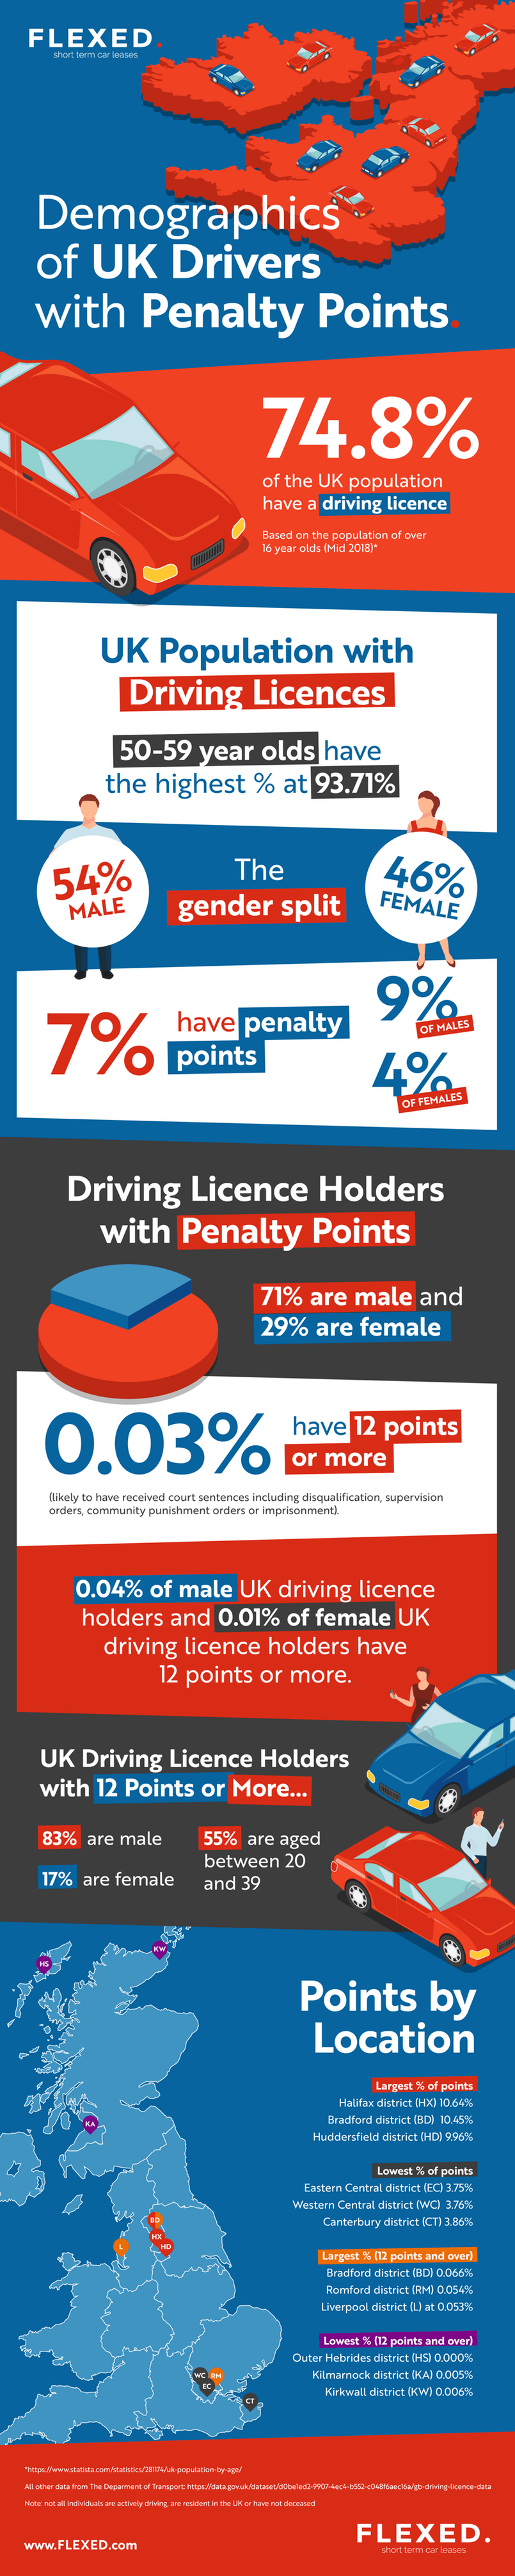 Driving penalty points infographic